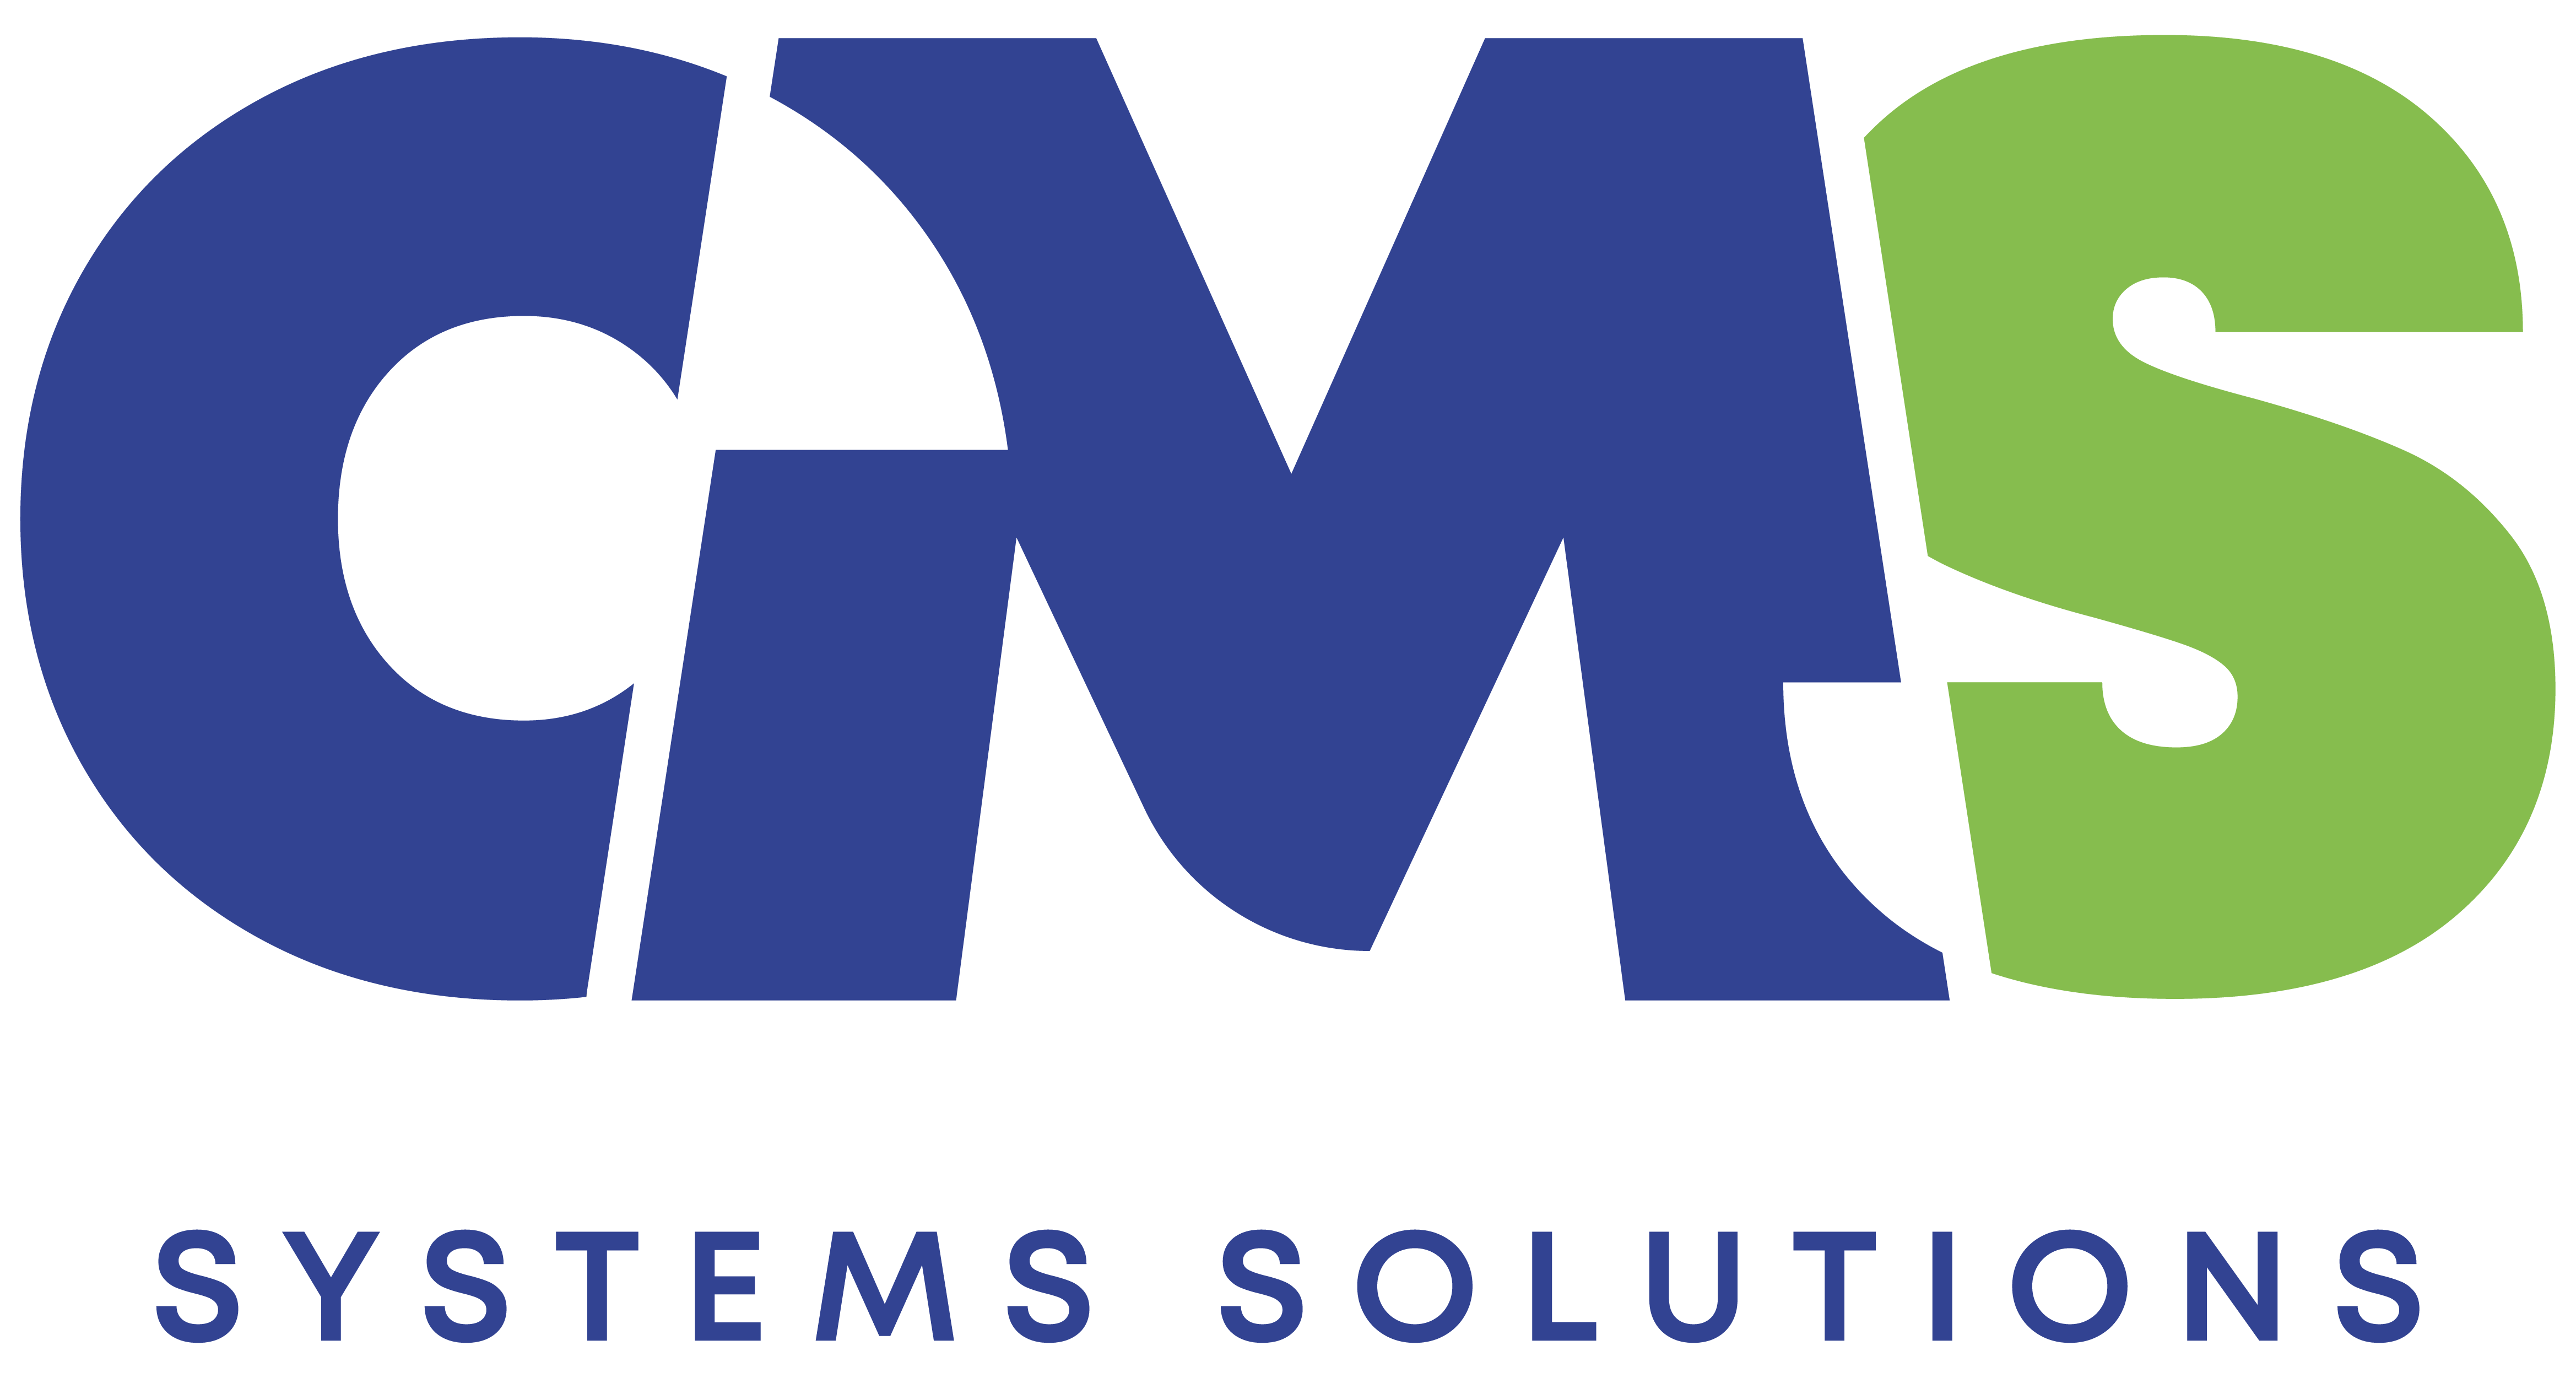 CMS Systems Solutions Ltd